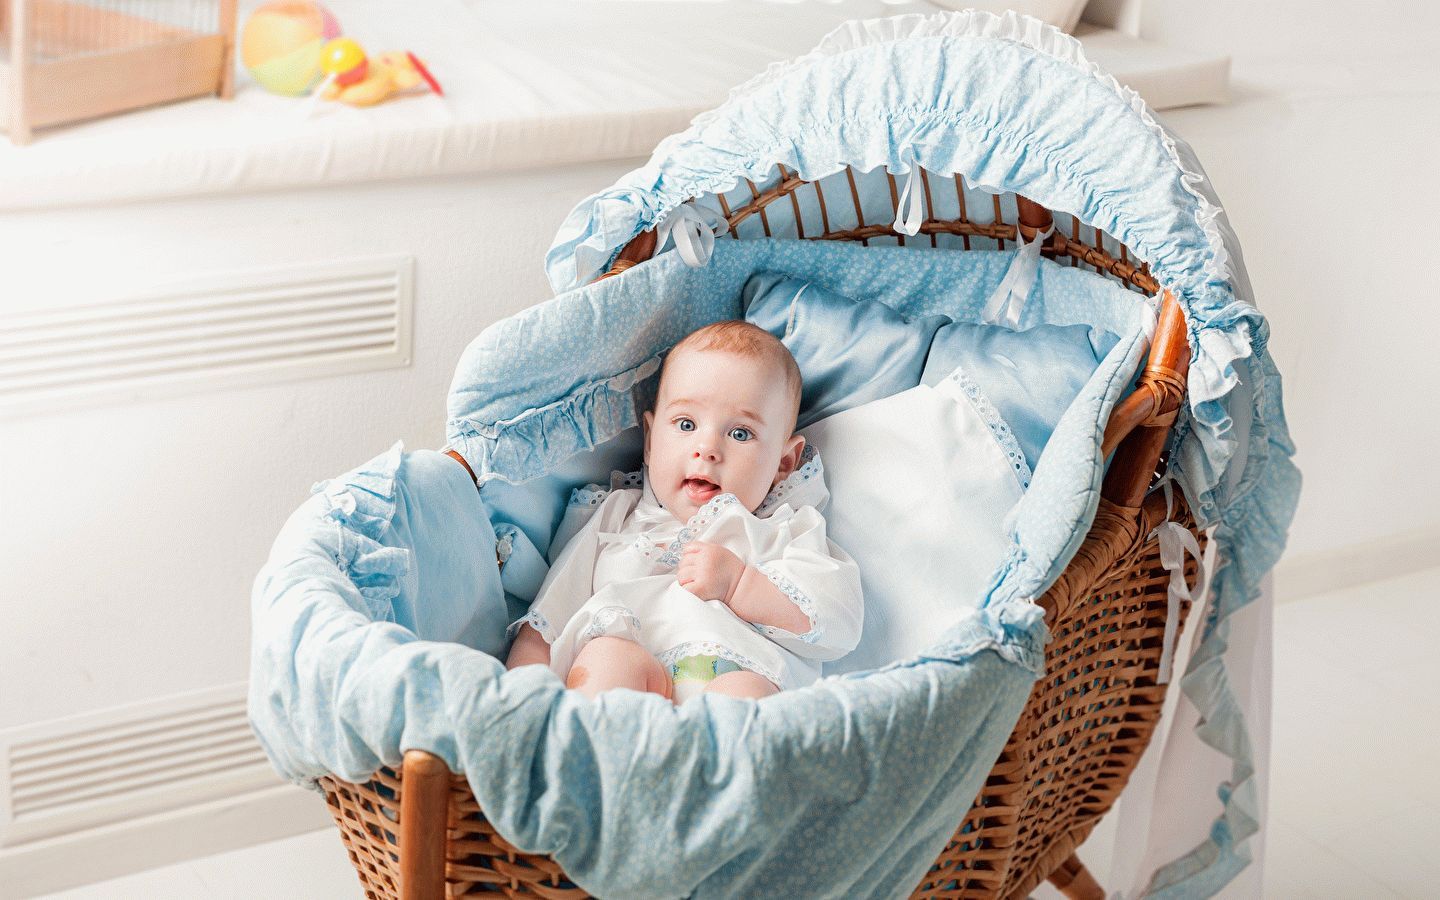 The best baby cribs in 2022